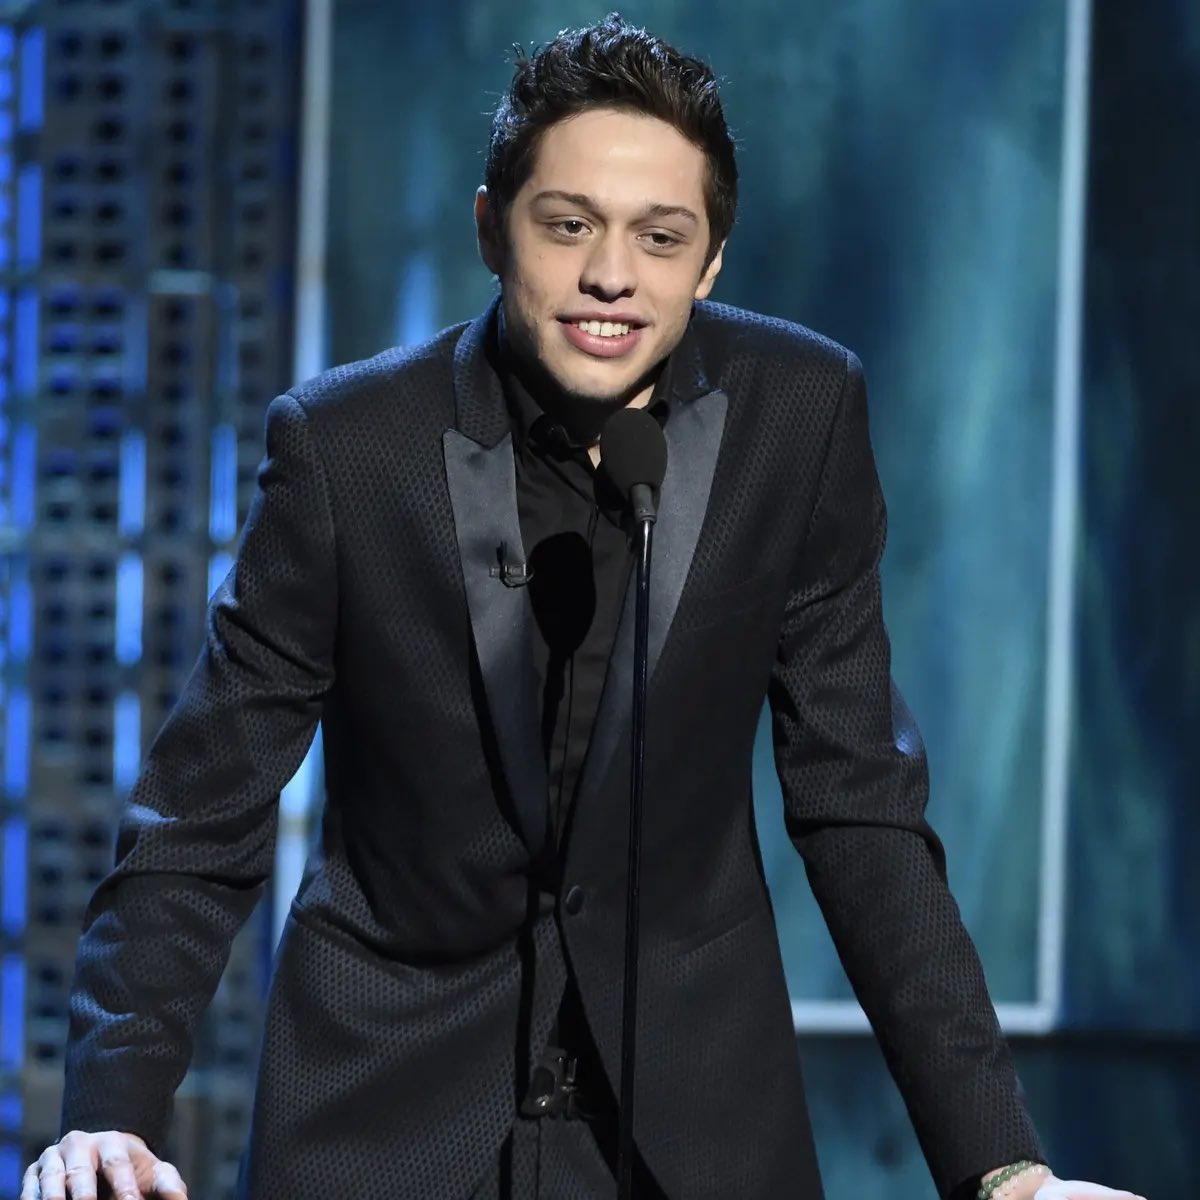 No one understands how cute Pete Davidson is like look at him